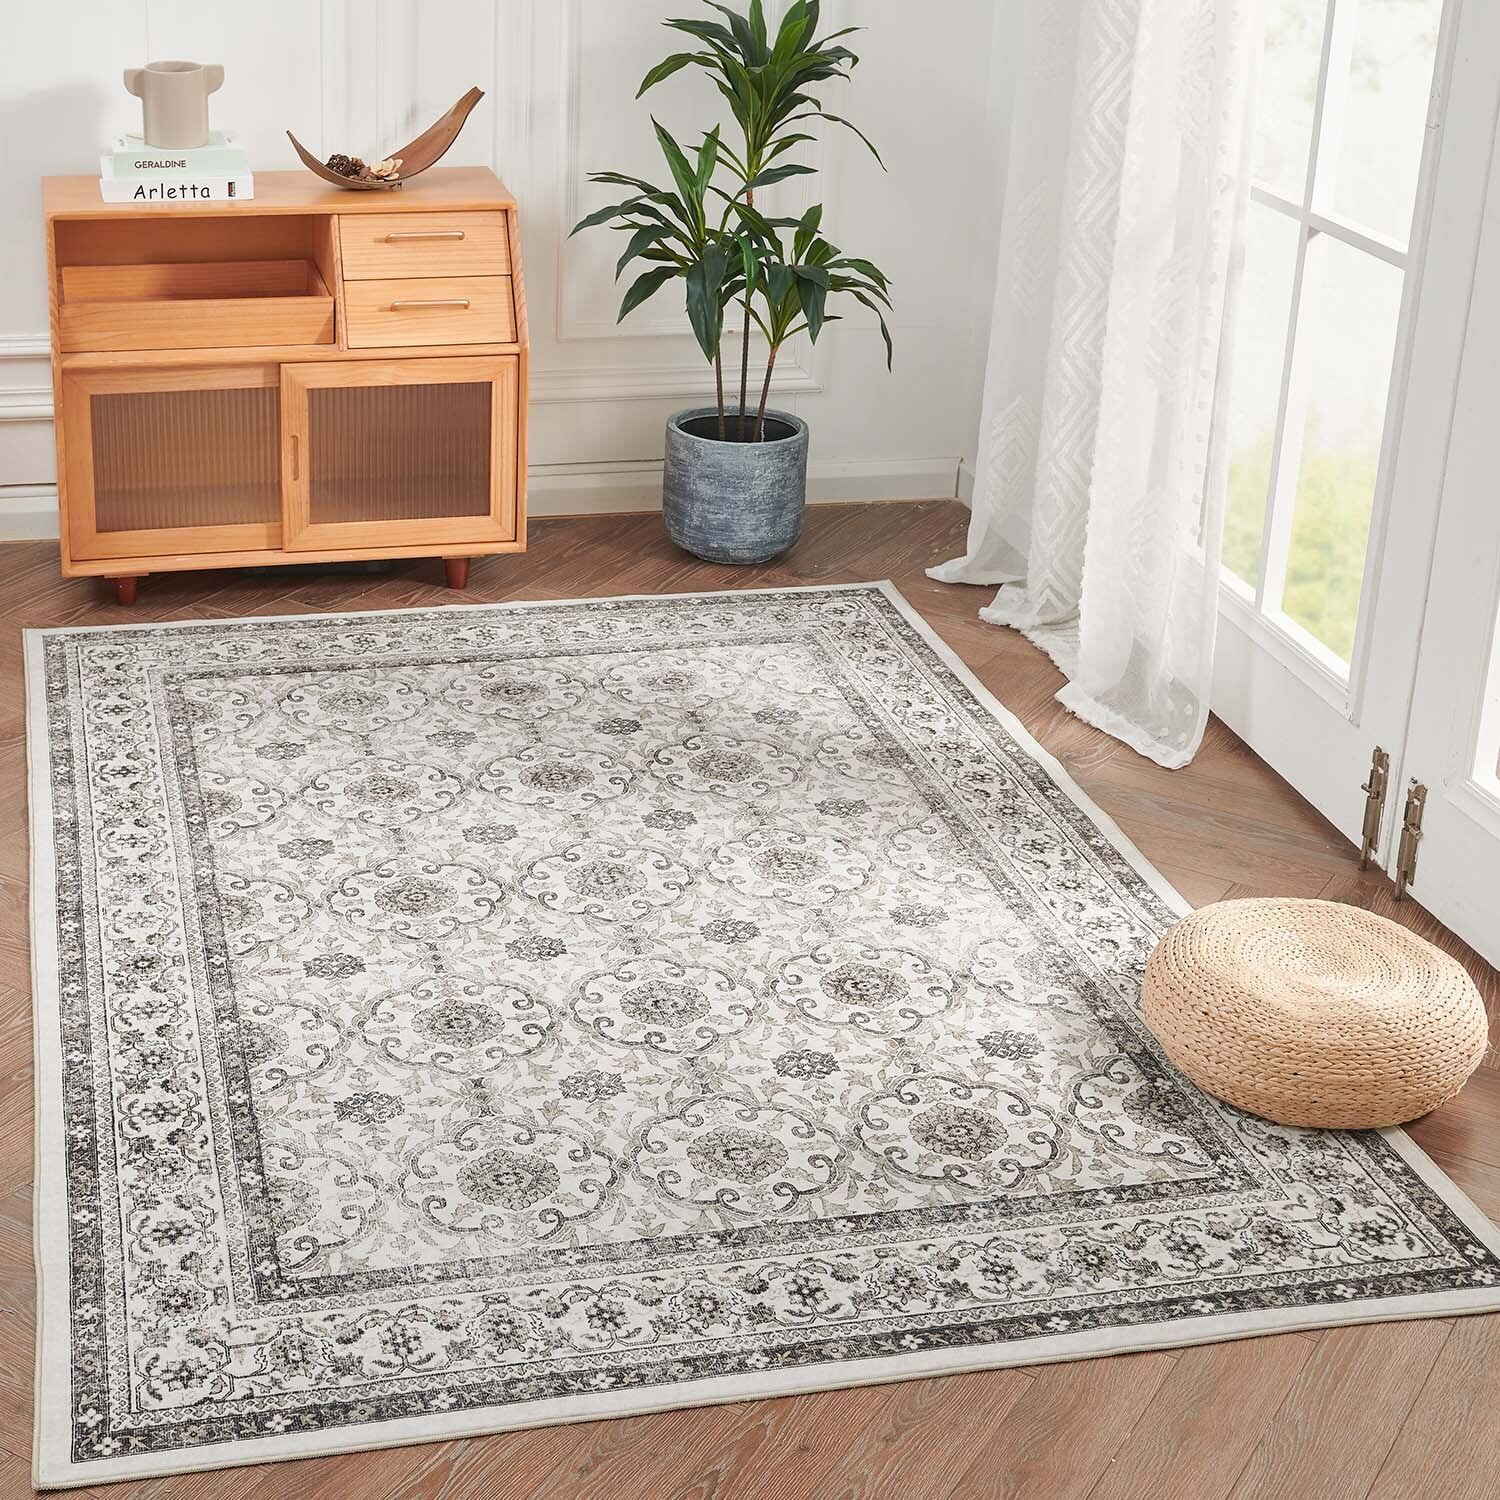  Moynesa Ultra-Thin Washable Area Rug - 5x7 Large Gray Rug for  Living Room Vintage Rugs for Bedroom, Non Slip Non Shedding Pet Friendly  Dining Room Mat Carpet for Department Office Kitchen 